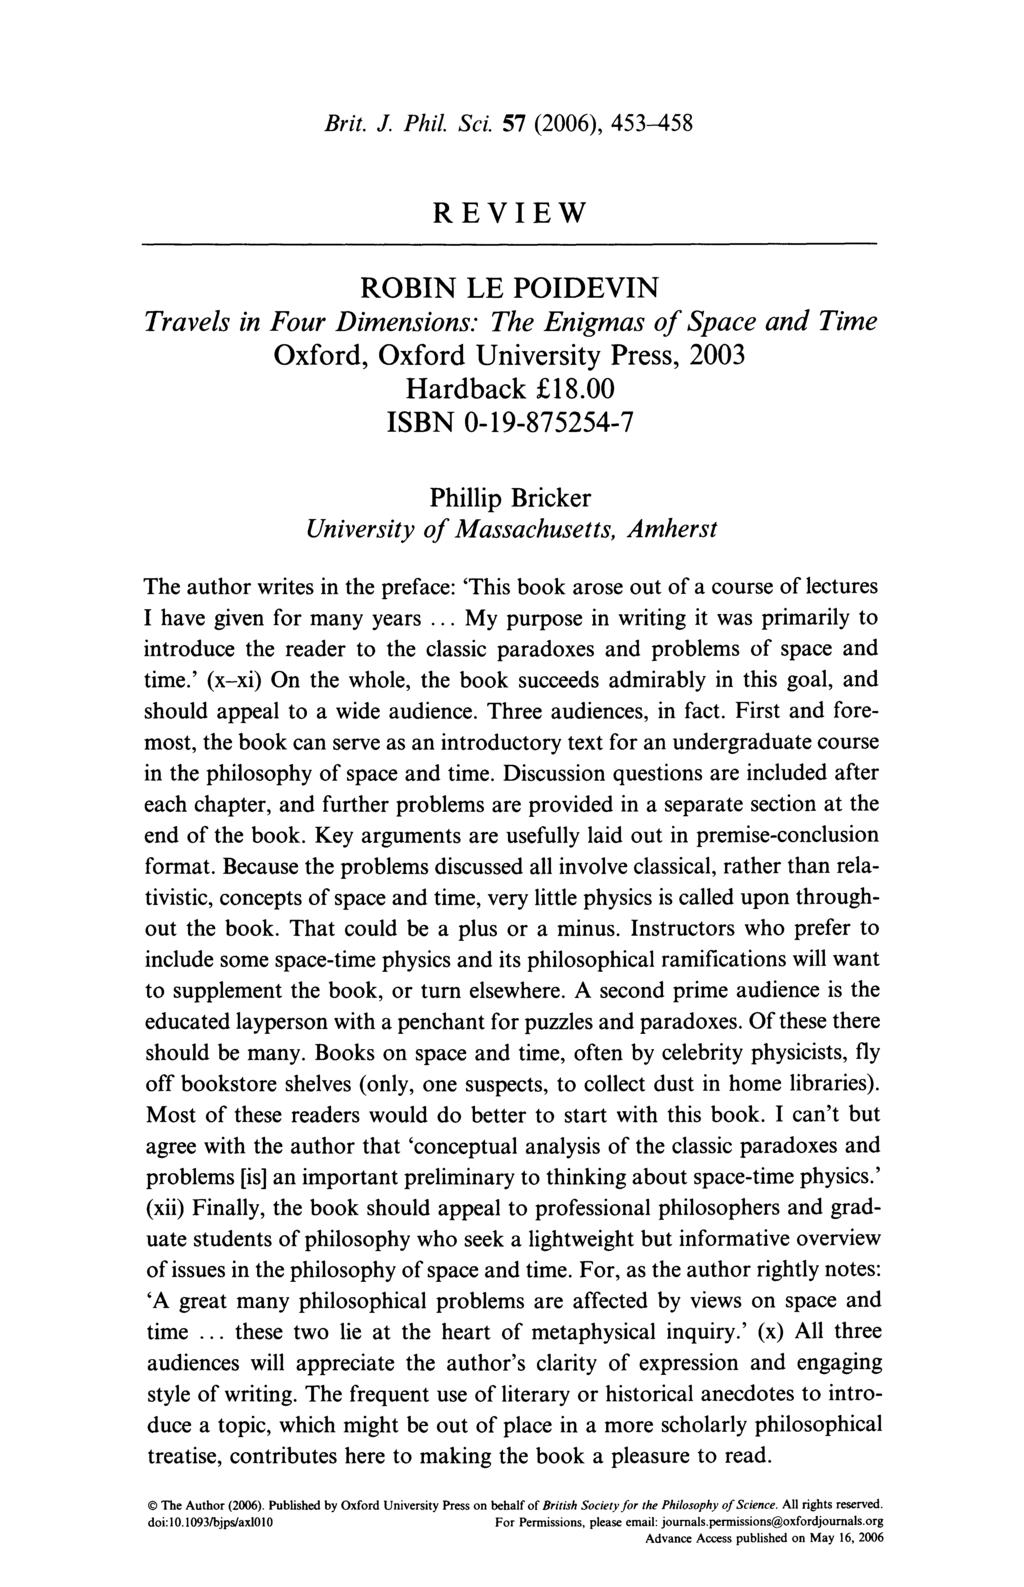 Brit. J. Phil. Sci. 57 (2006), 453-458 REVIEW ROBIN LE POIDEVIN Travels in Four Dimensions: The Enigmas of Space and Time Oxford, Oxford University Press, 2003 Hardback?18.